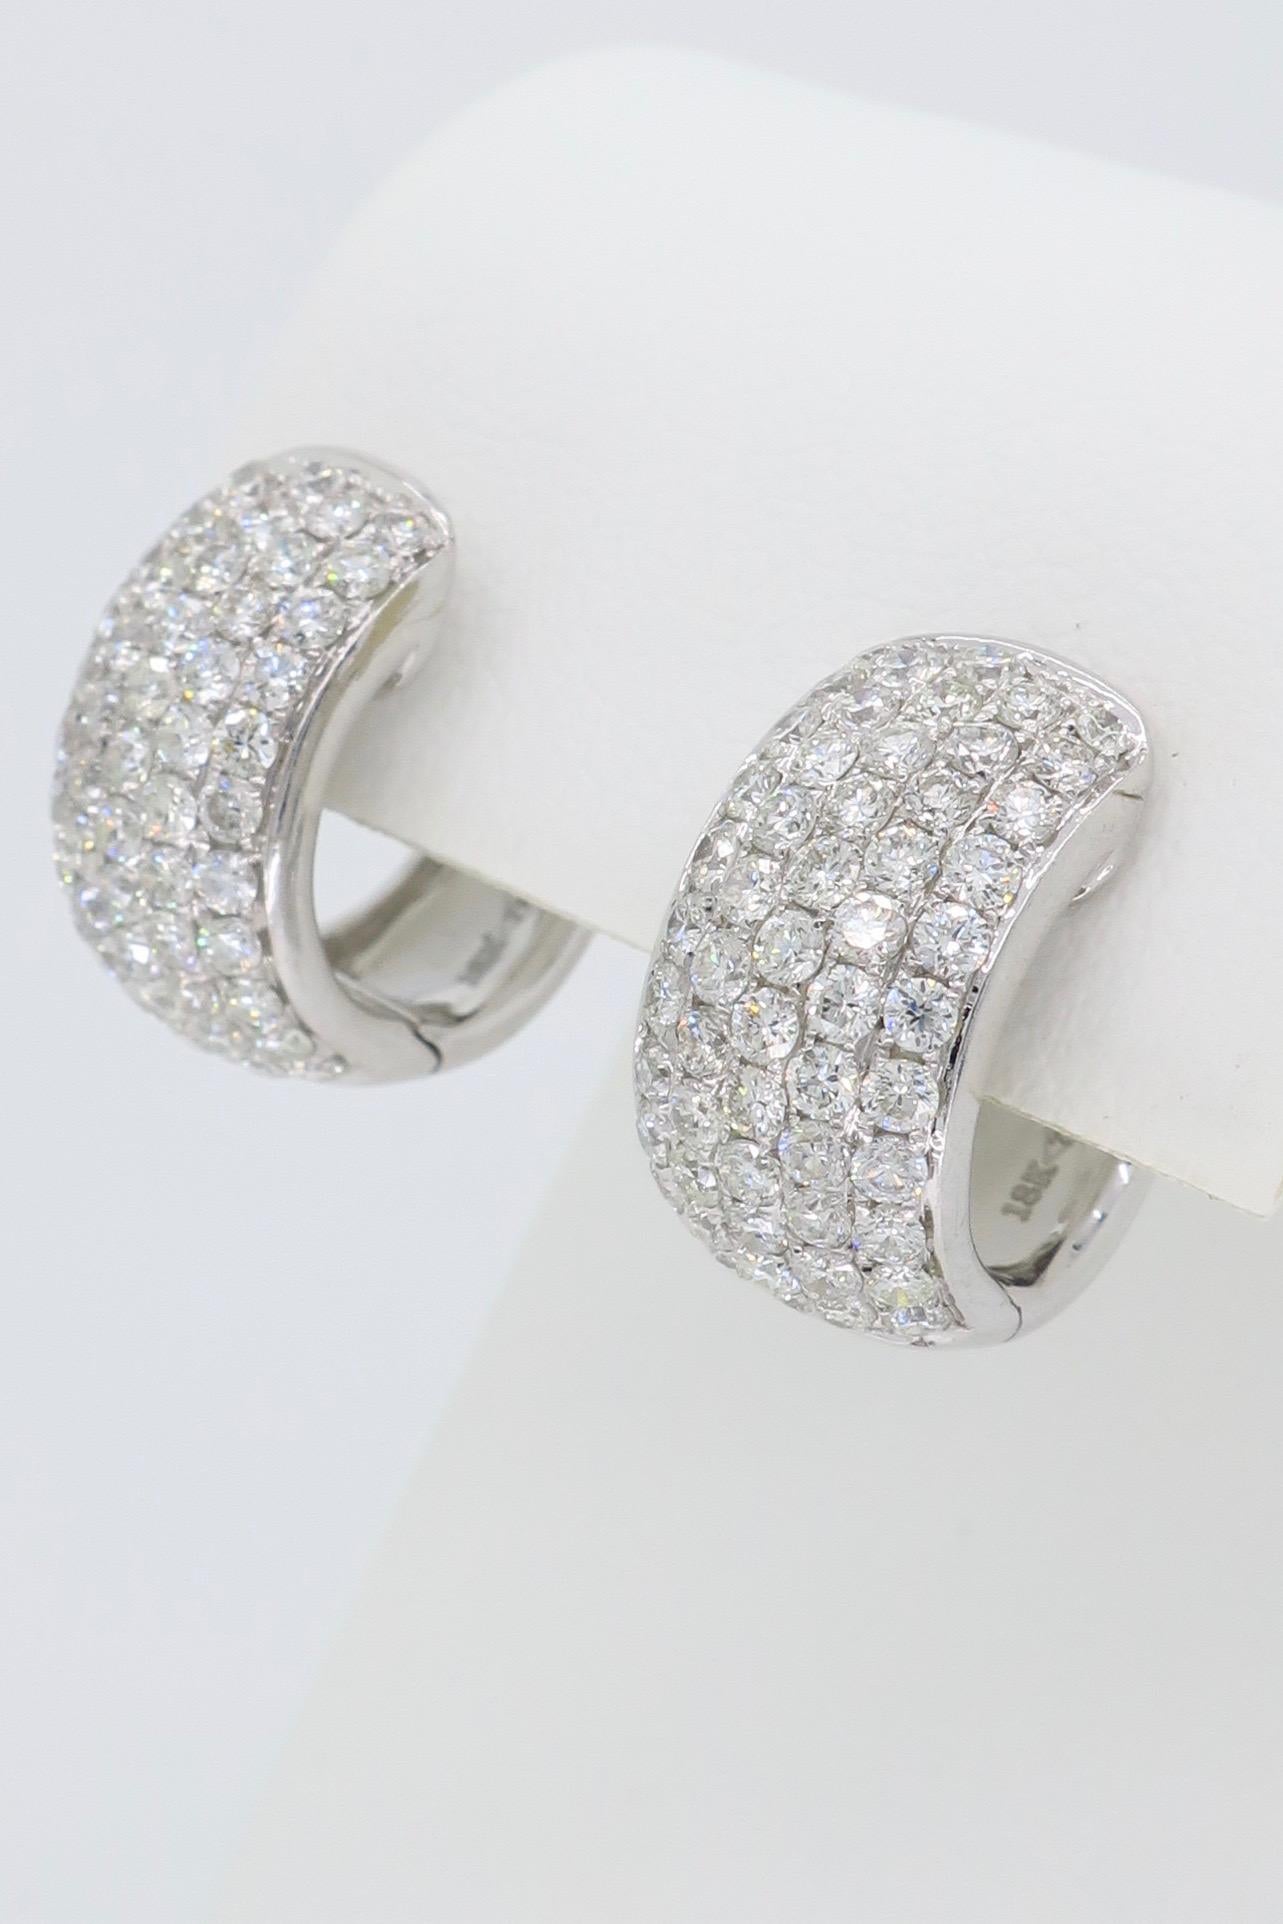 These beautiful hoops feature approximately 3.30CTW of Round Brilliant Cut Diamonds.

Diamond Carat Weight: Approximately 3.30CTW
Diamond Cut: 112 Round Brilliant Cut Diamonds
Color: Average G-I
Clarity: Average VS-SI
Metal: 18K White